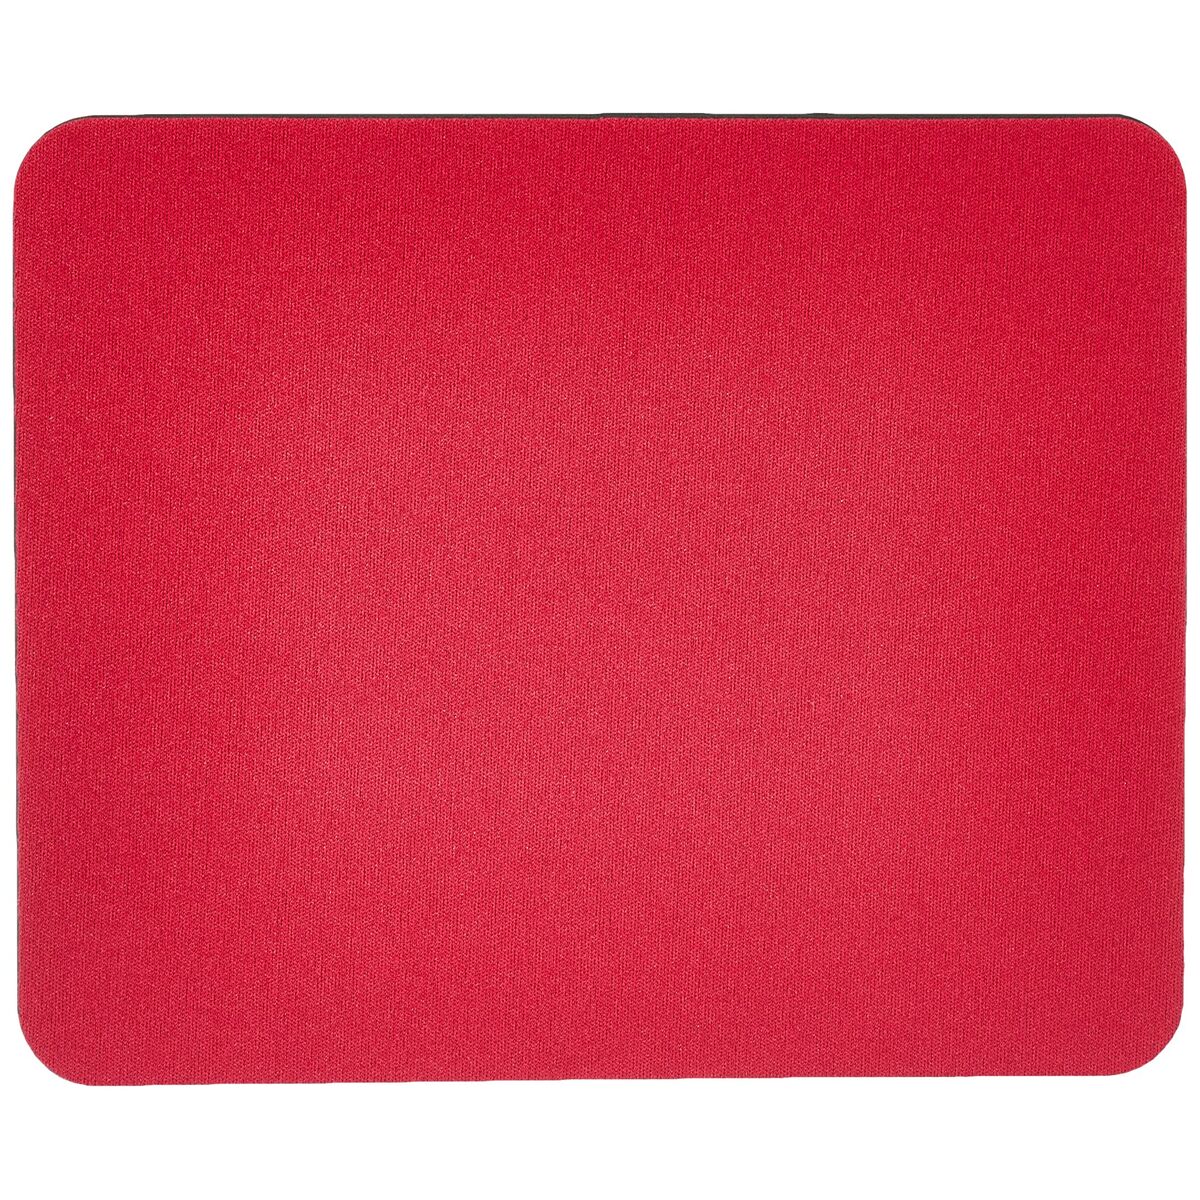 Non-slip Mat Fellowes 23 x 19 cm Red (Refurbished A)